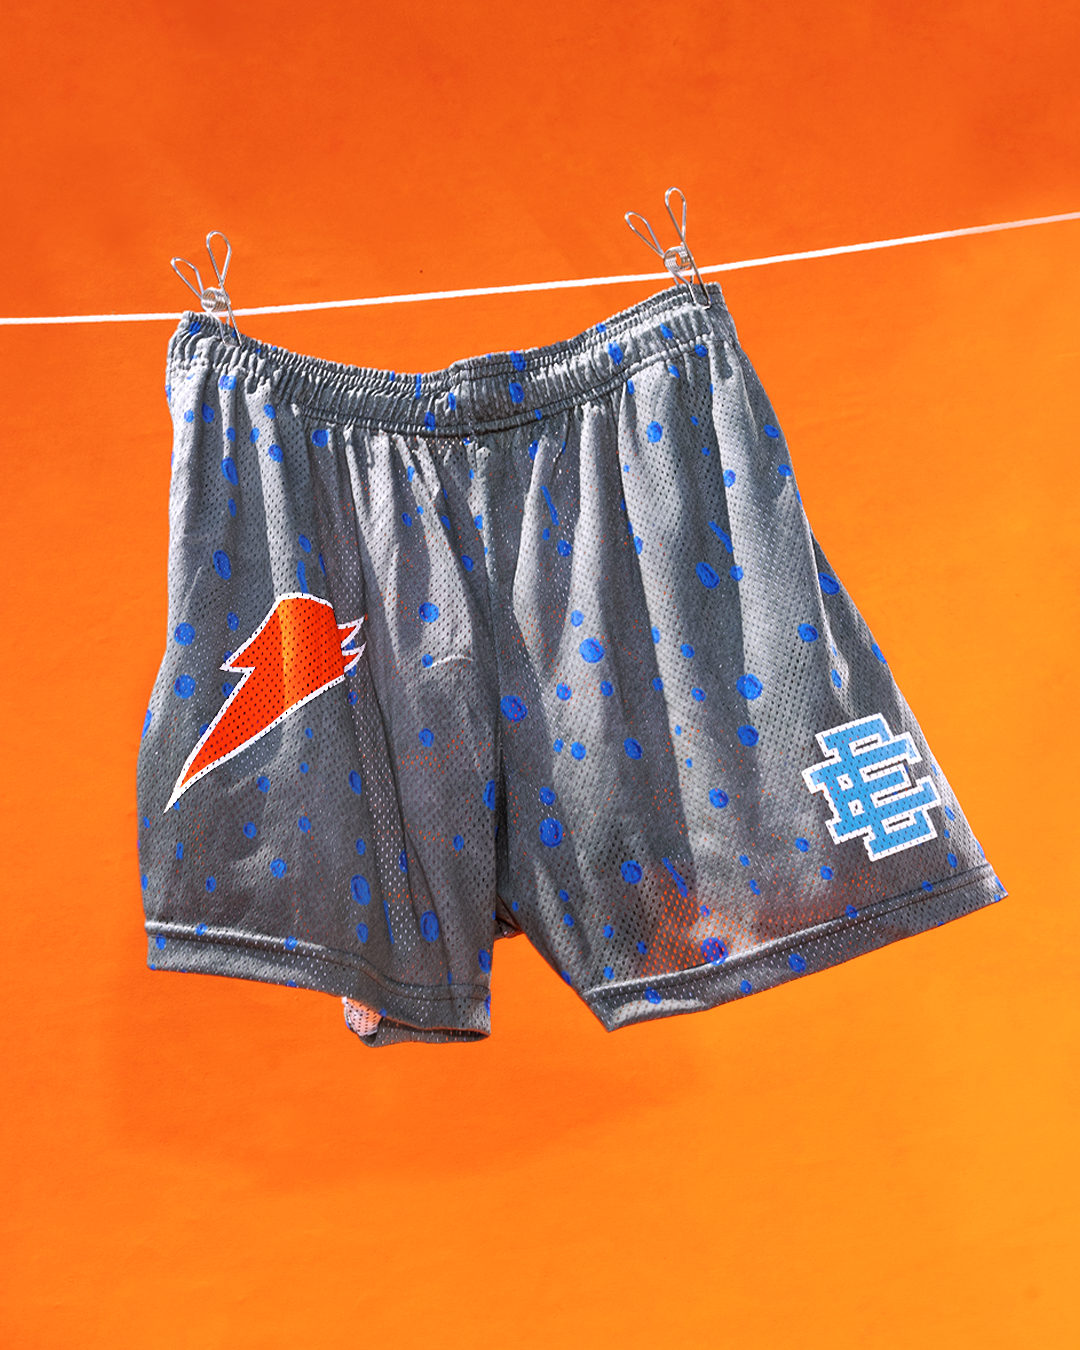 Gray athletic shorts with blue dots, featuring a red lightning bolt logo and a white &quot;BE&quot; monogram, hanging on a clothesline against an orange background